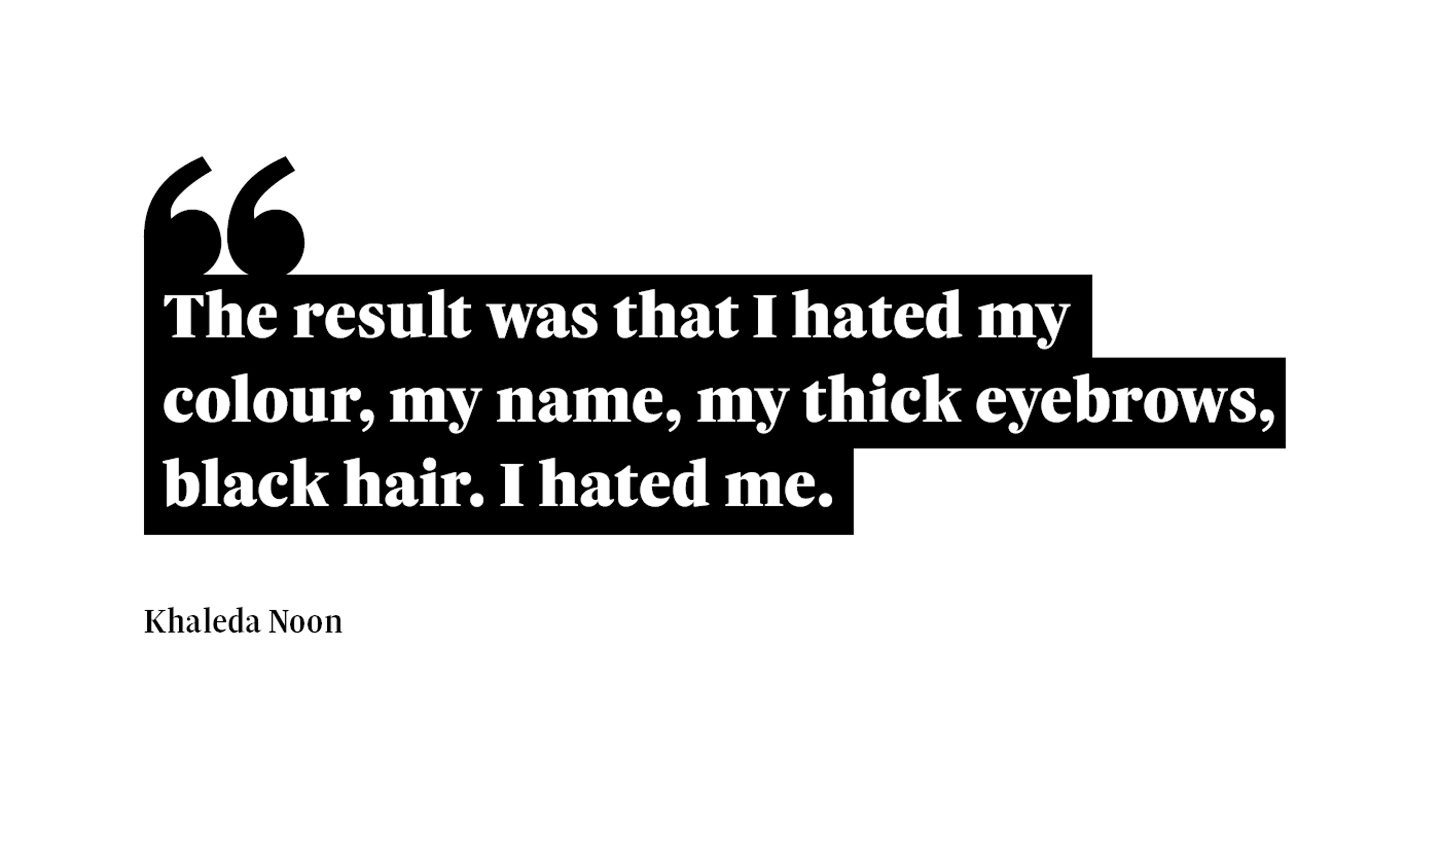 A graphic that reads: “The result was that I hated my colour, my name, my thick eyebrows, black hair. I hated me.” A quote from Khaleda Noon.